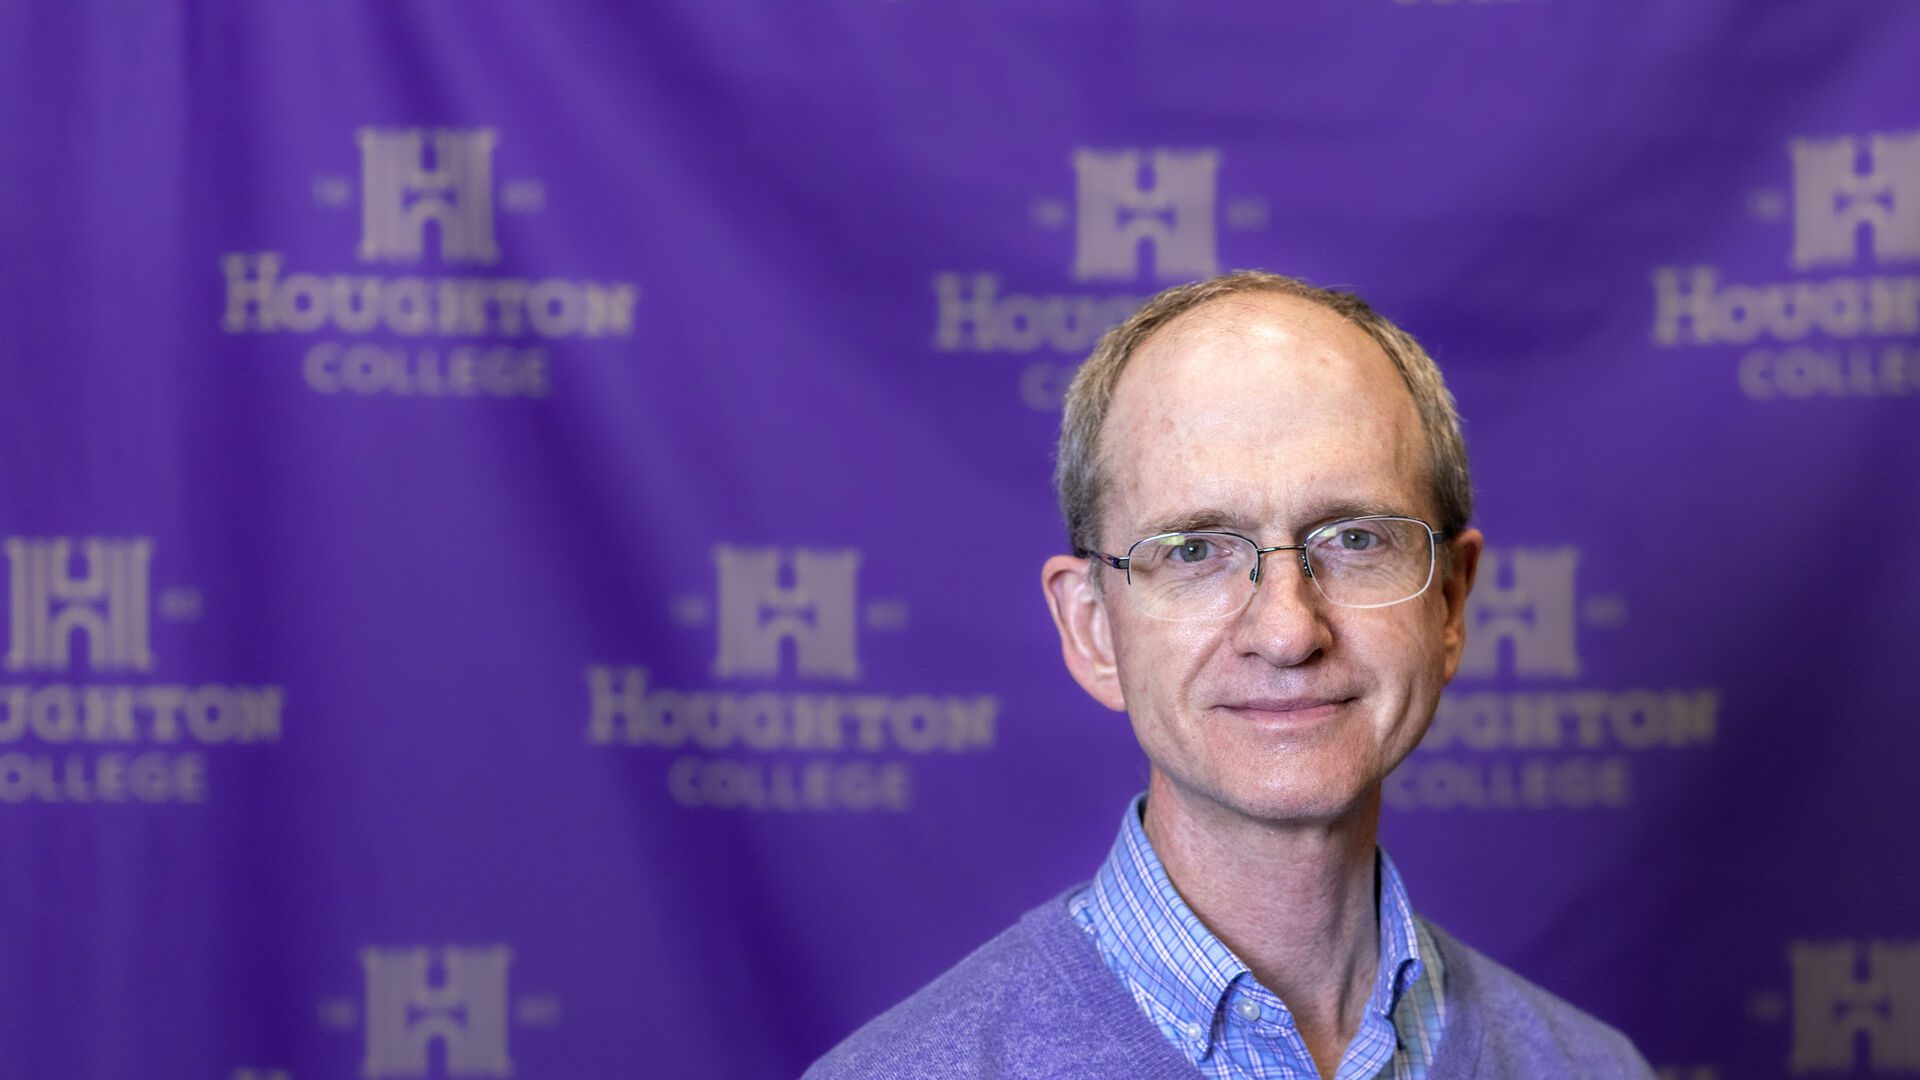 Houghton Professor Marcus Dean standing in front of Houghton University step and repeat banner.